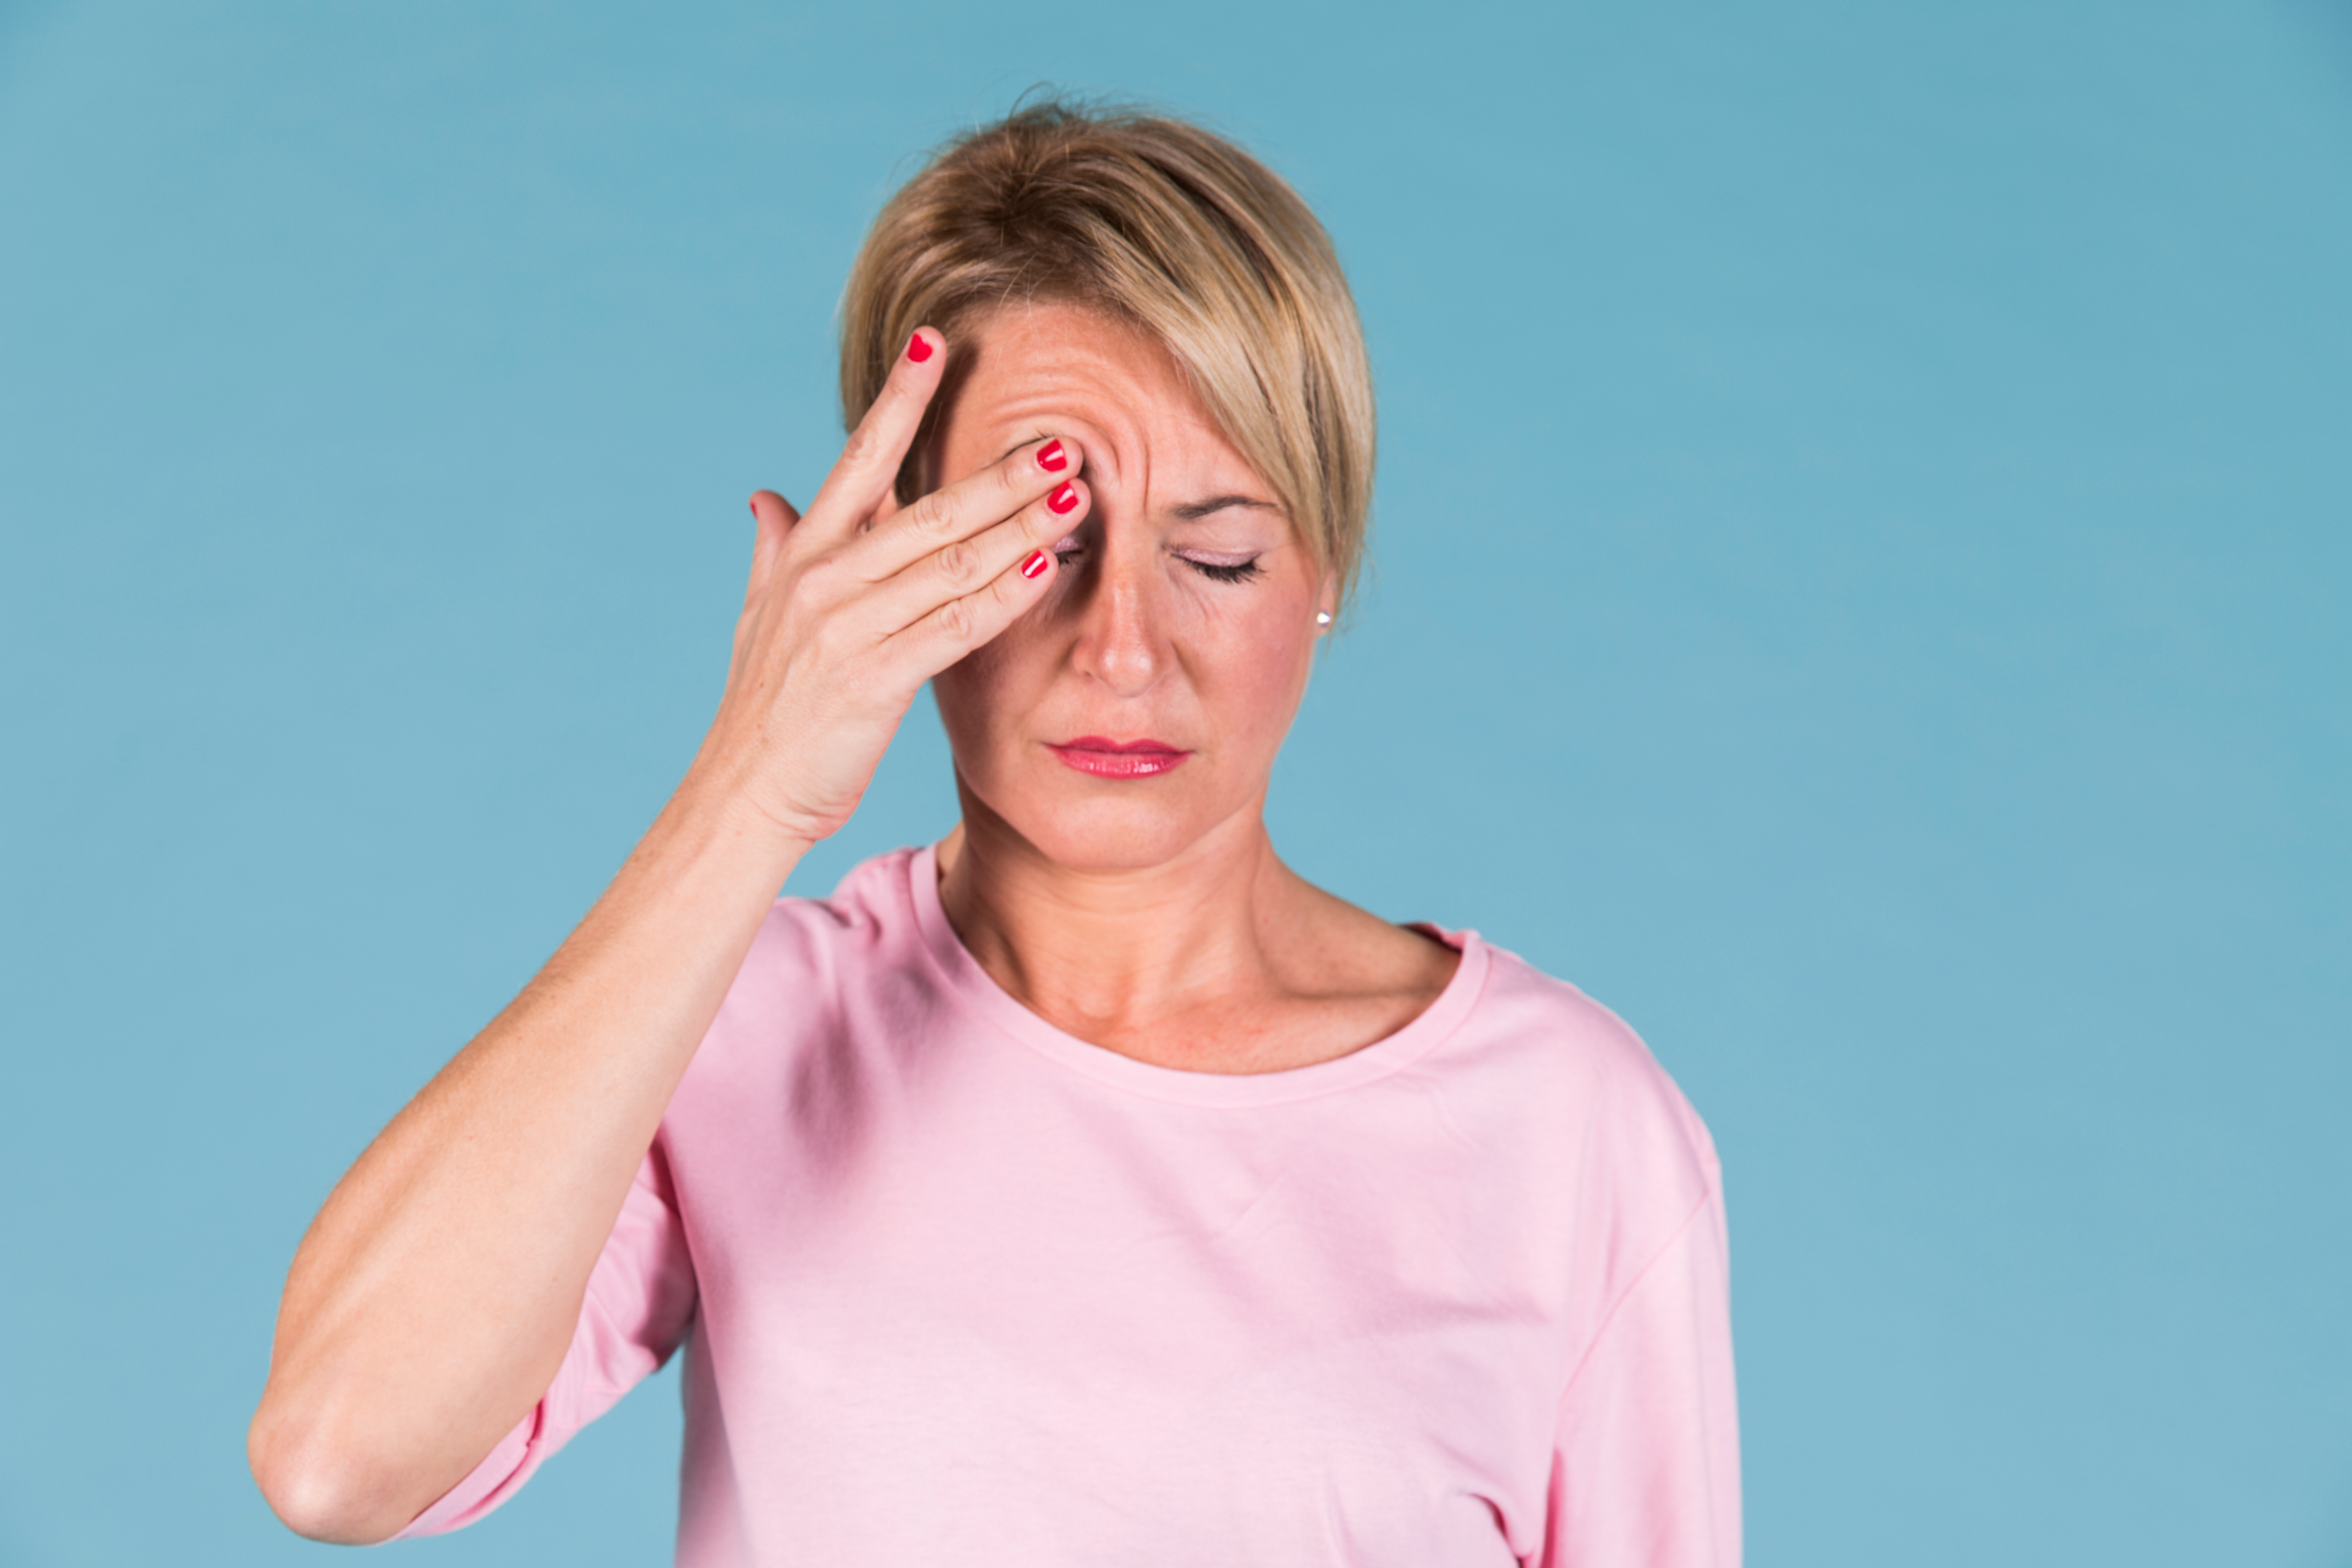                                 Decrease in the severity of headaches is a sign of an ending Menopause